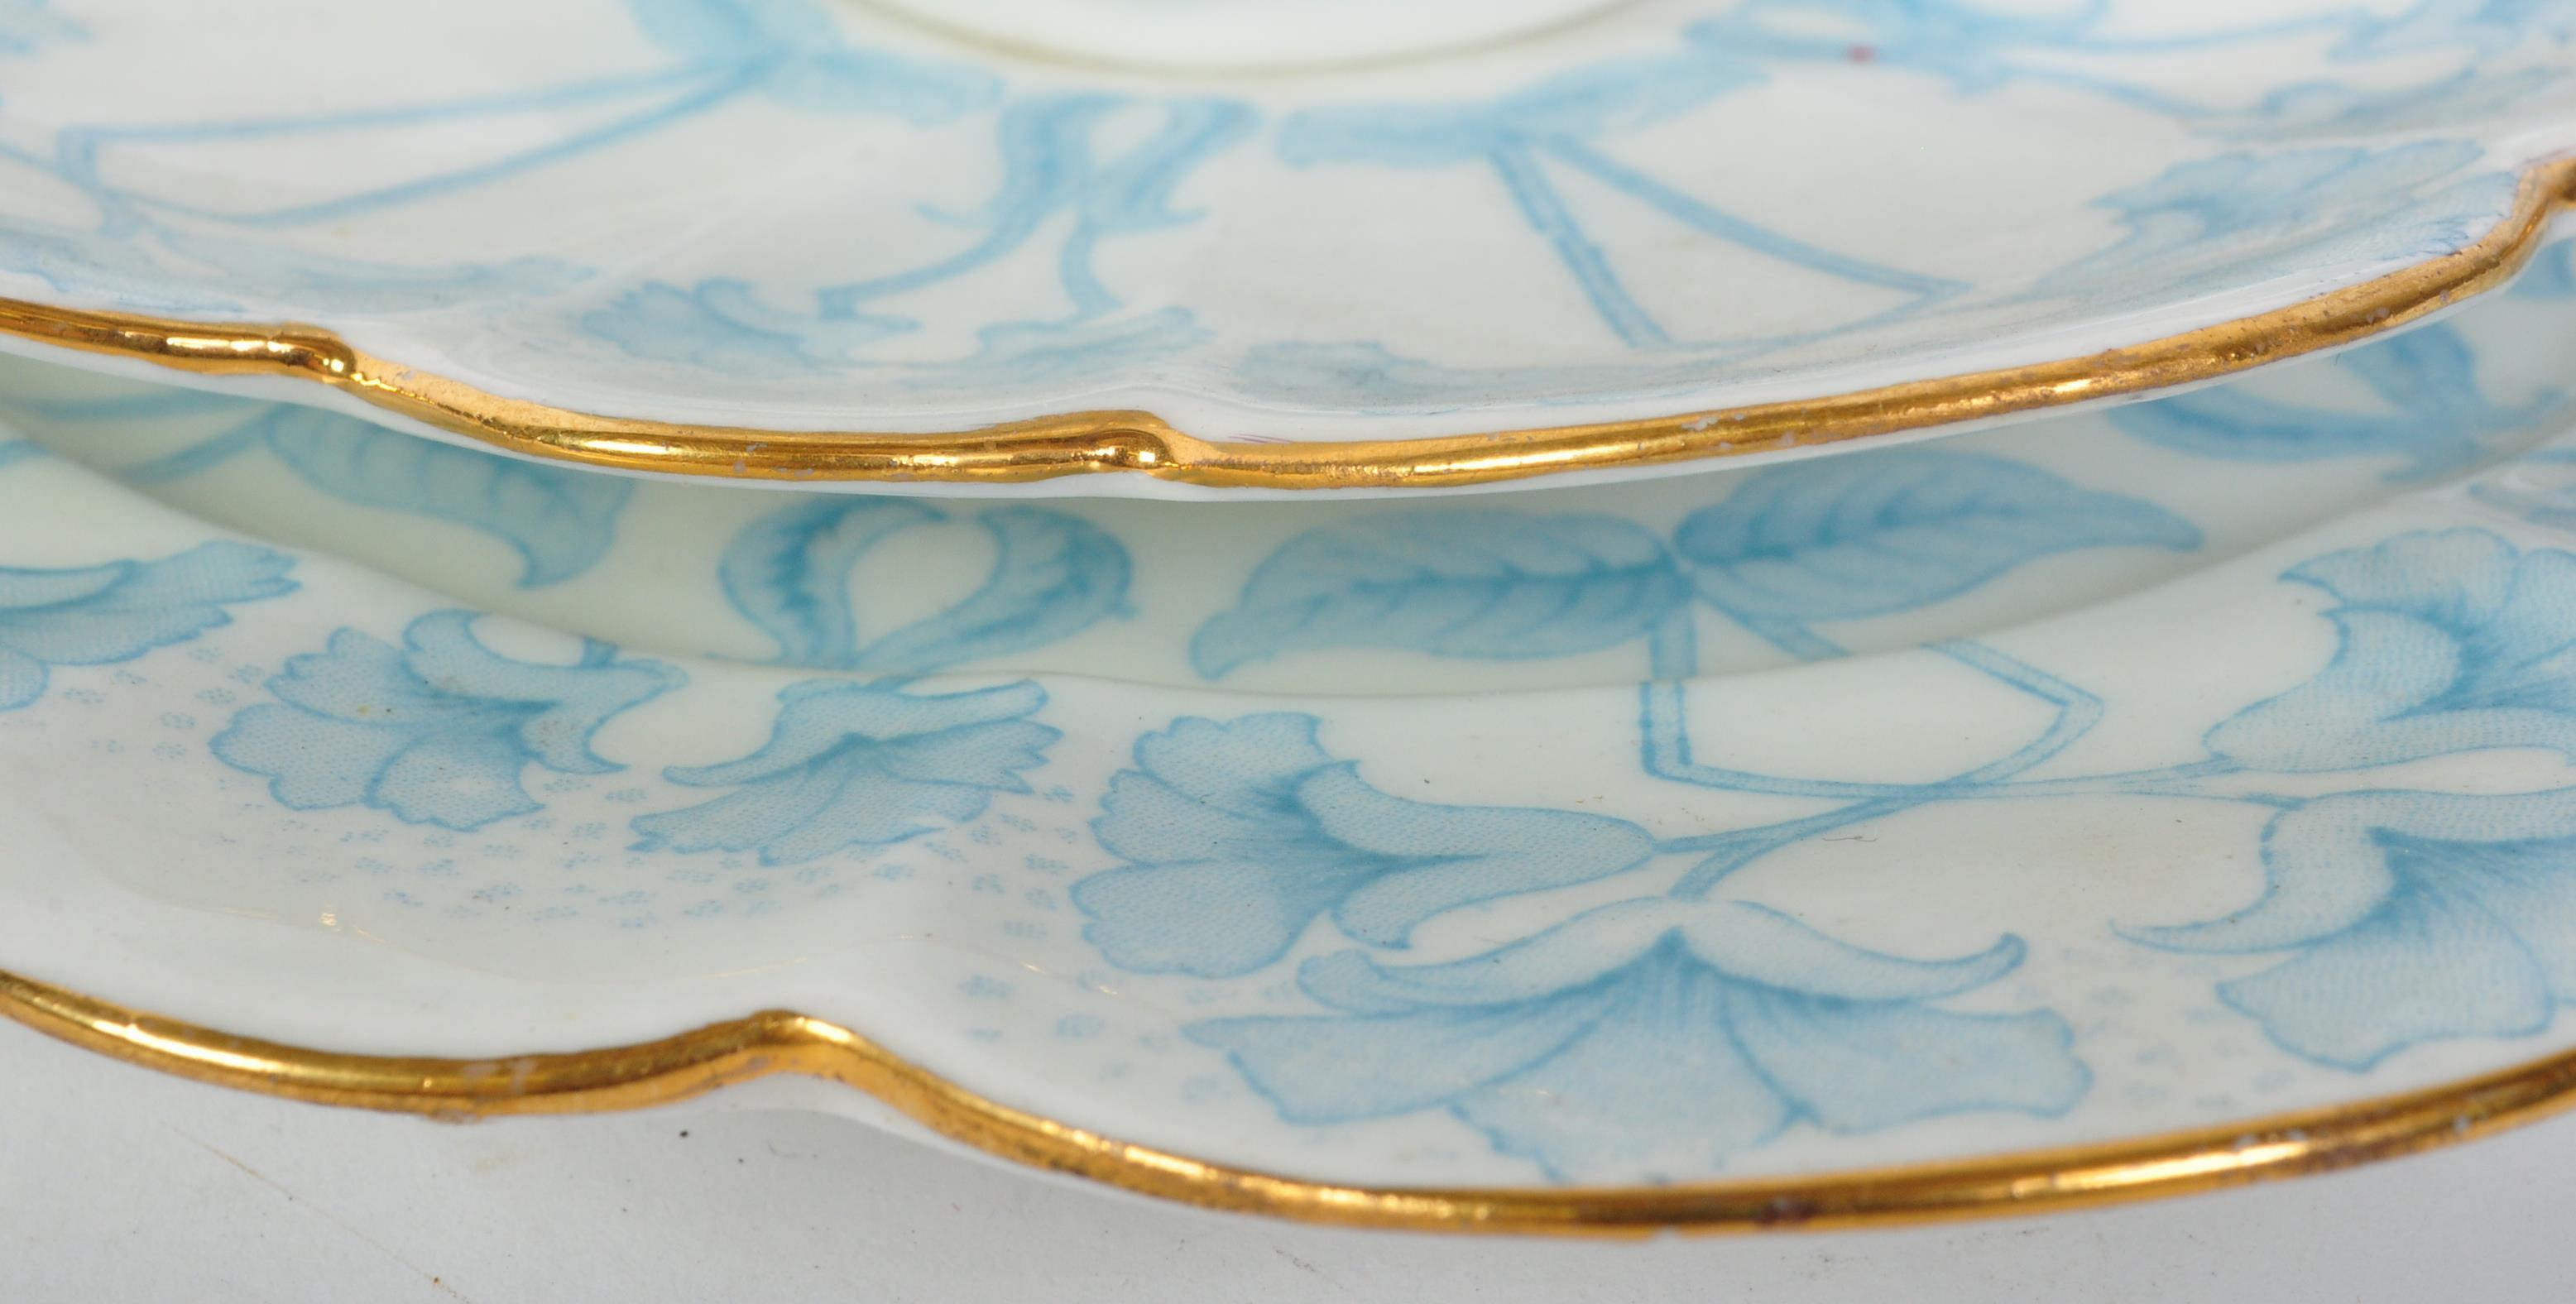 WILEMAN & CO SHELLEY BONE CHINA TEACUP & SAUCER TRIO - BLUE SNOWDROP - Image 4 of 6